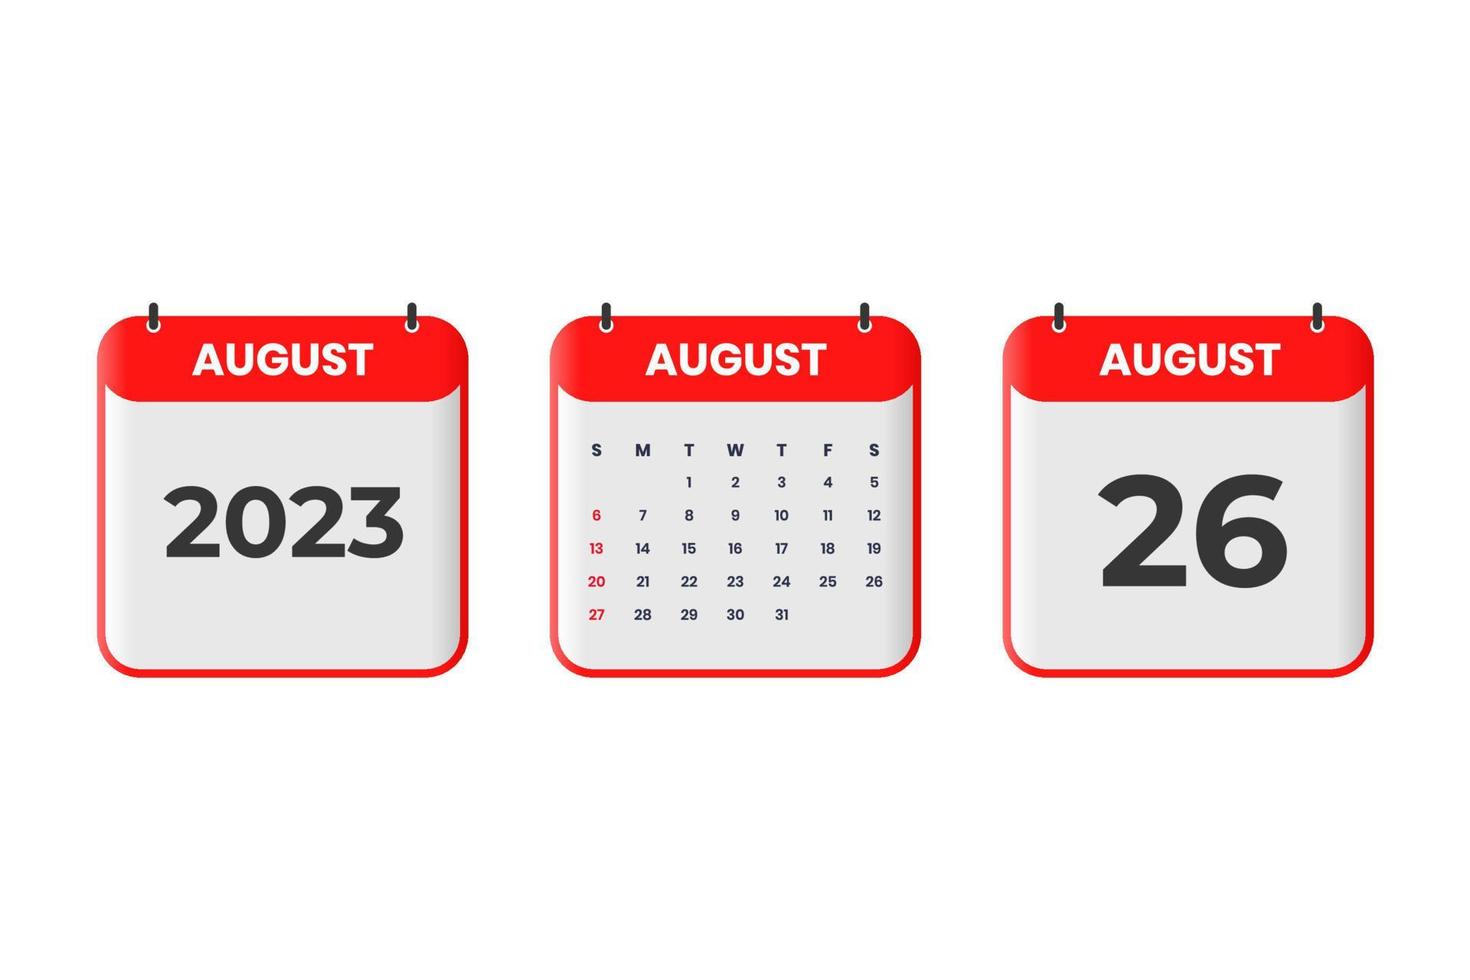 August 2023 calendar design. 26th August 2023 calendar icon for schedule, appointment, important date concept vector